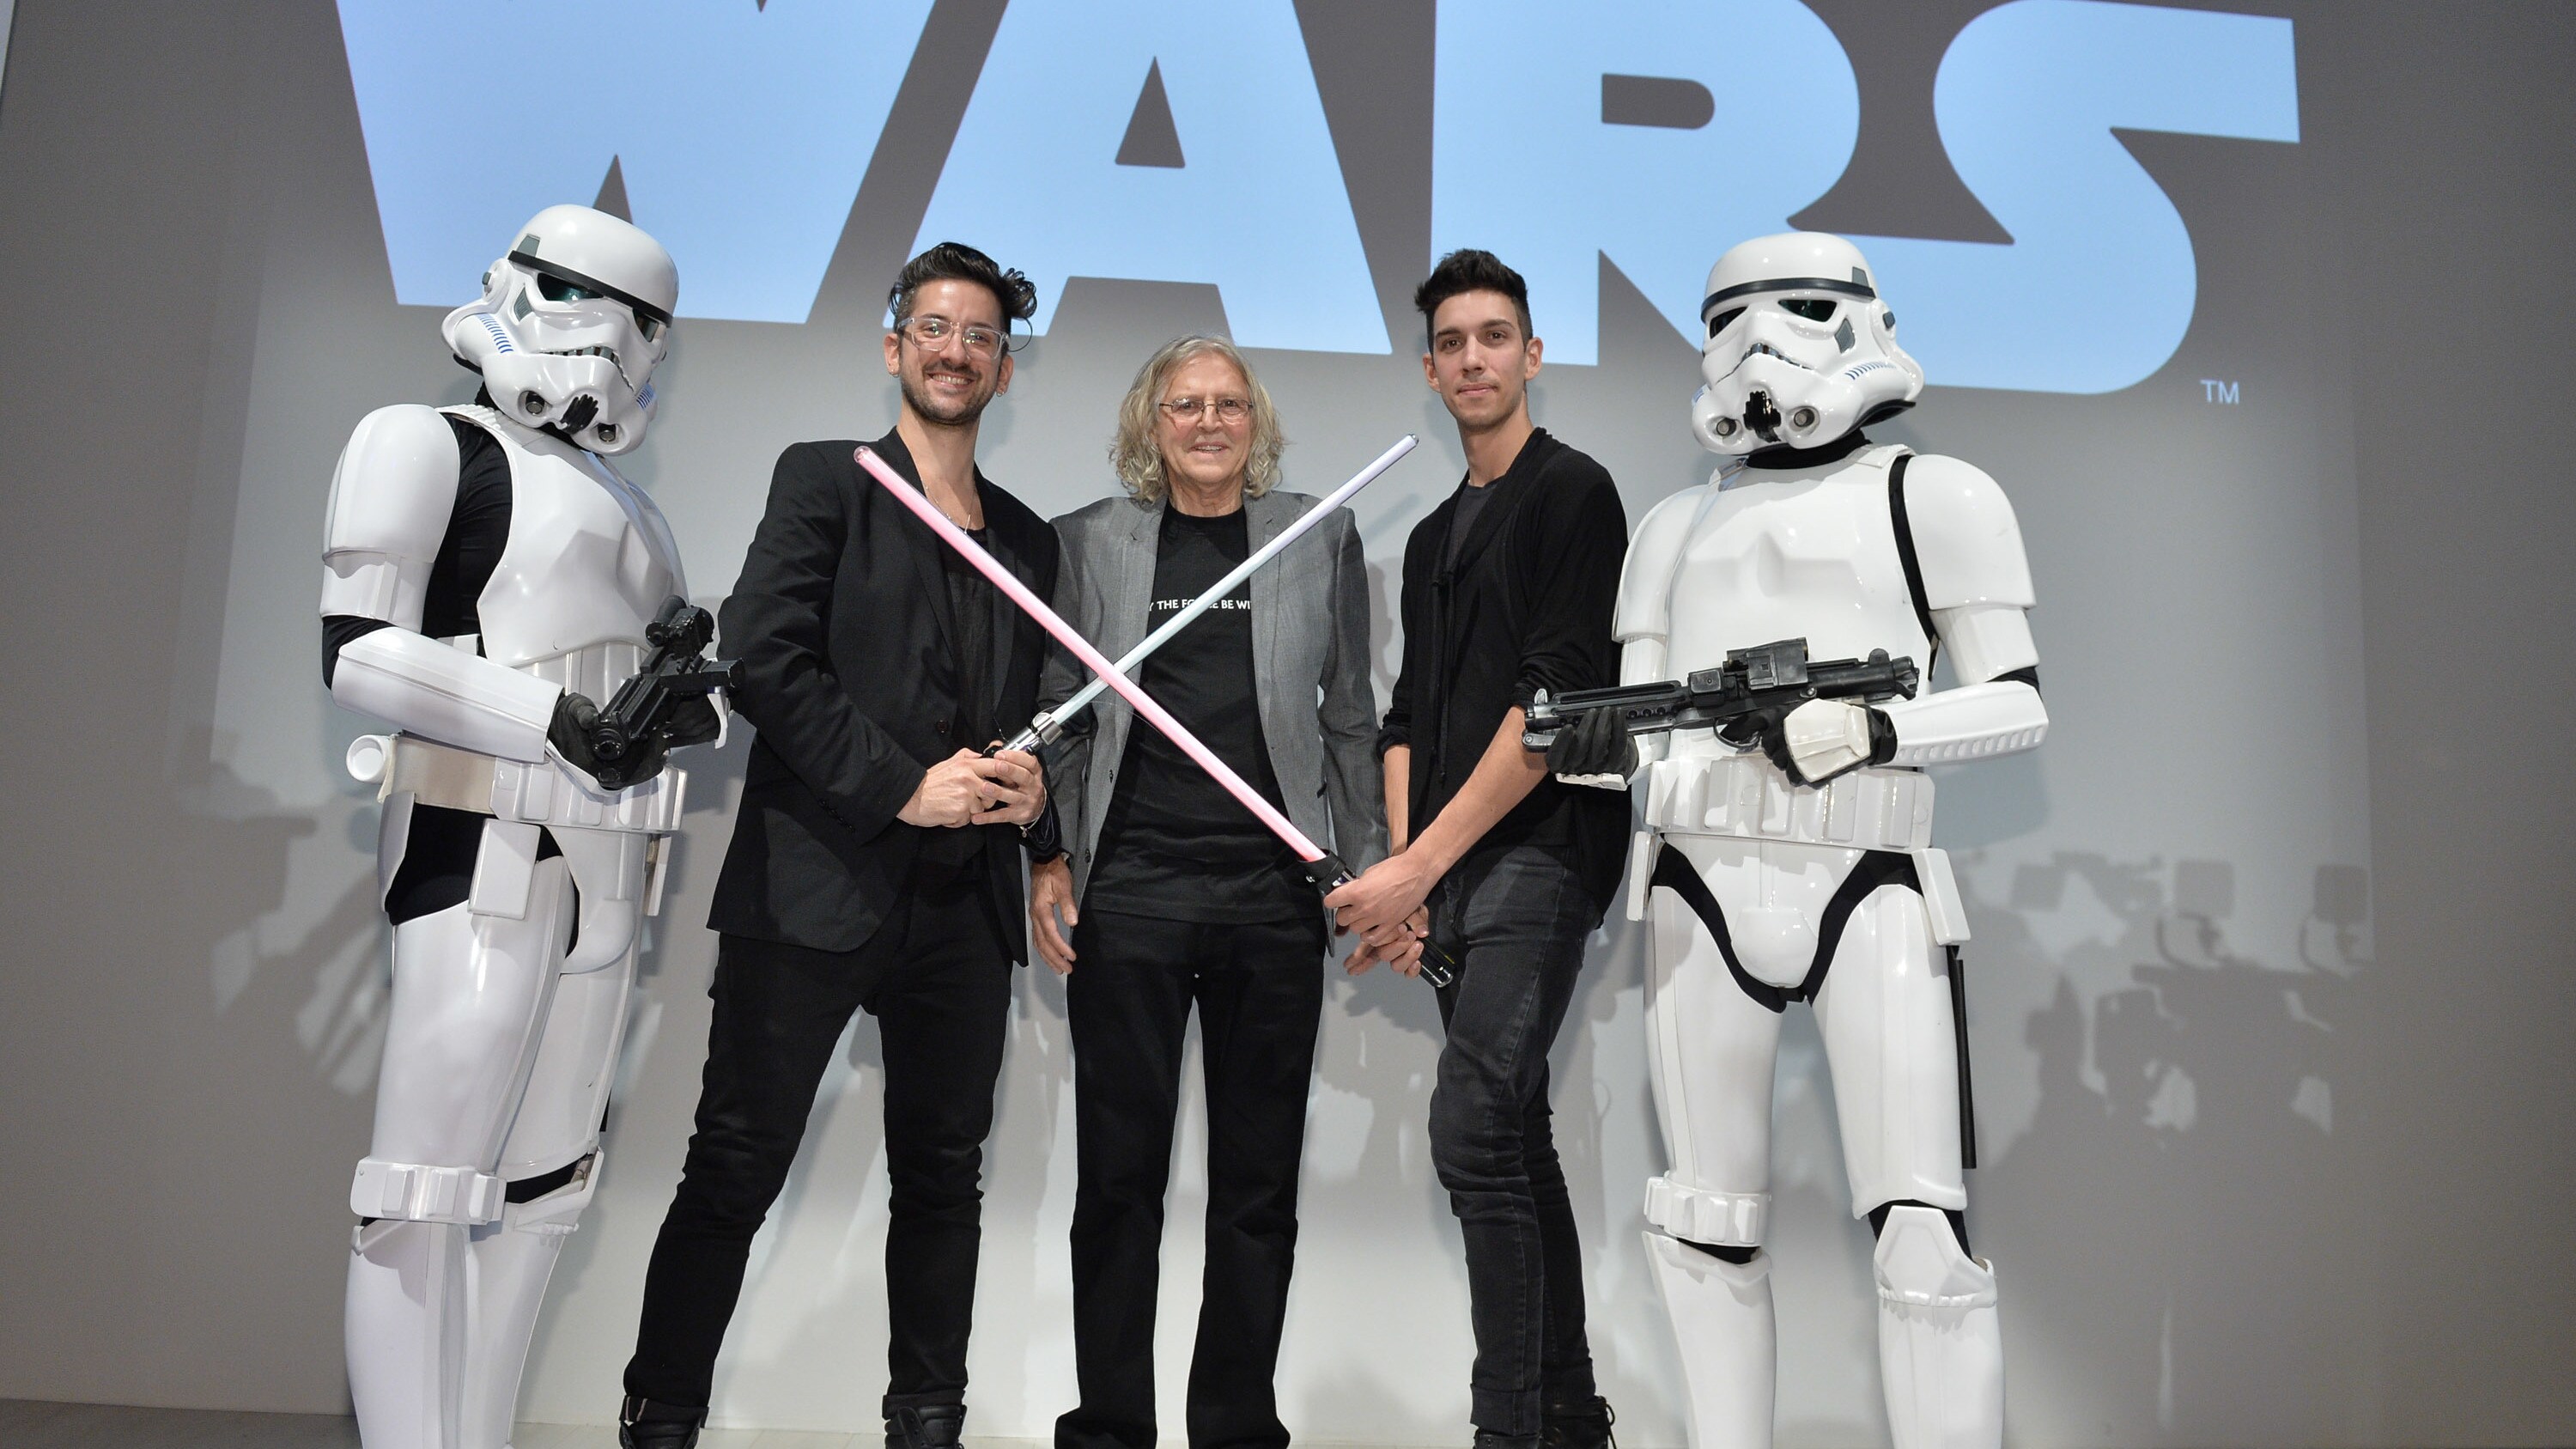 World MasterCard Fashion week - pose with stormtroopers